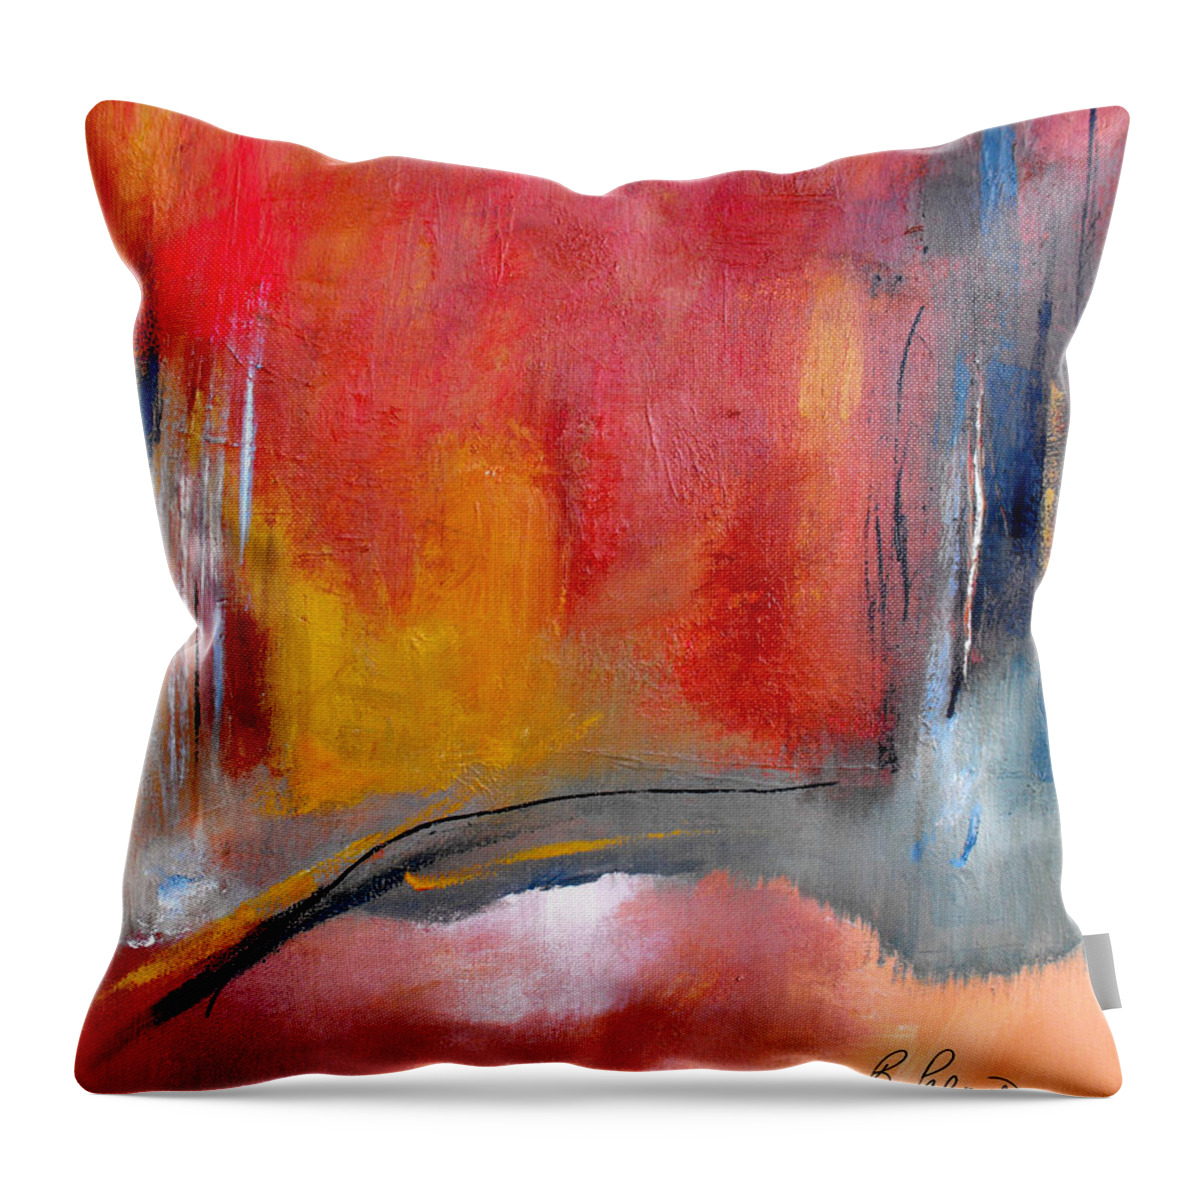 Abstrac Throw Pillow featuring the painting Chosen Path by Ruth Palmer